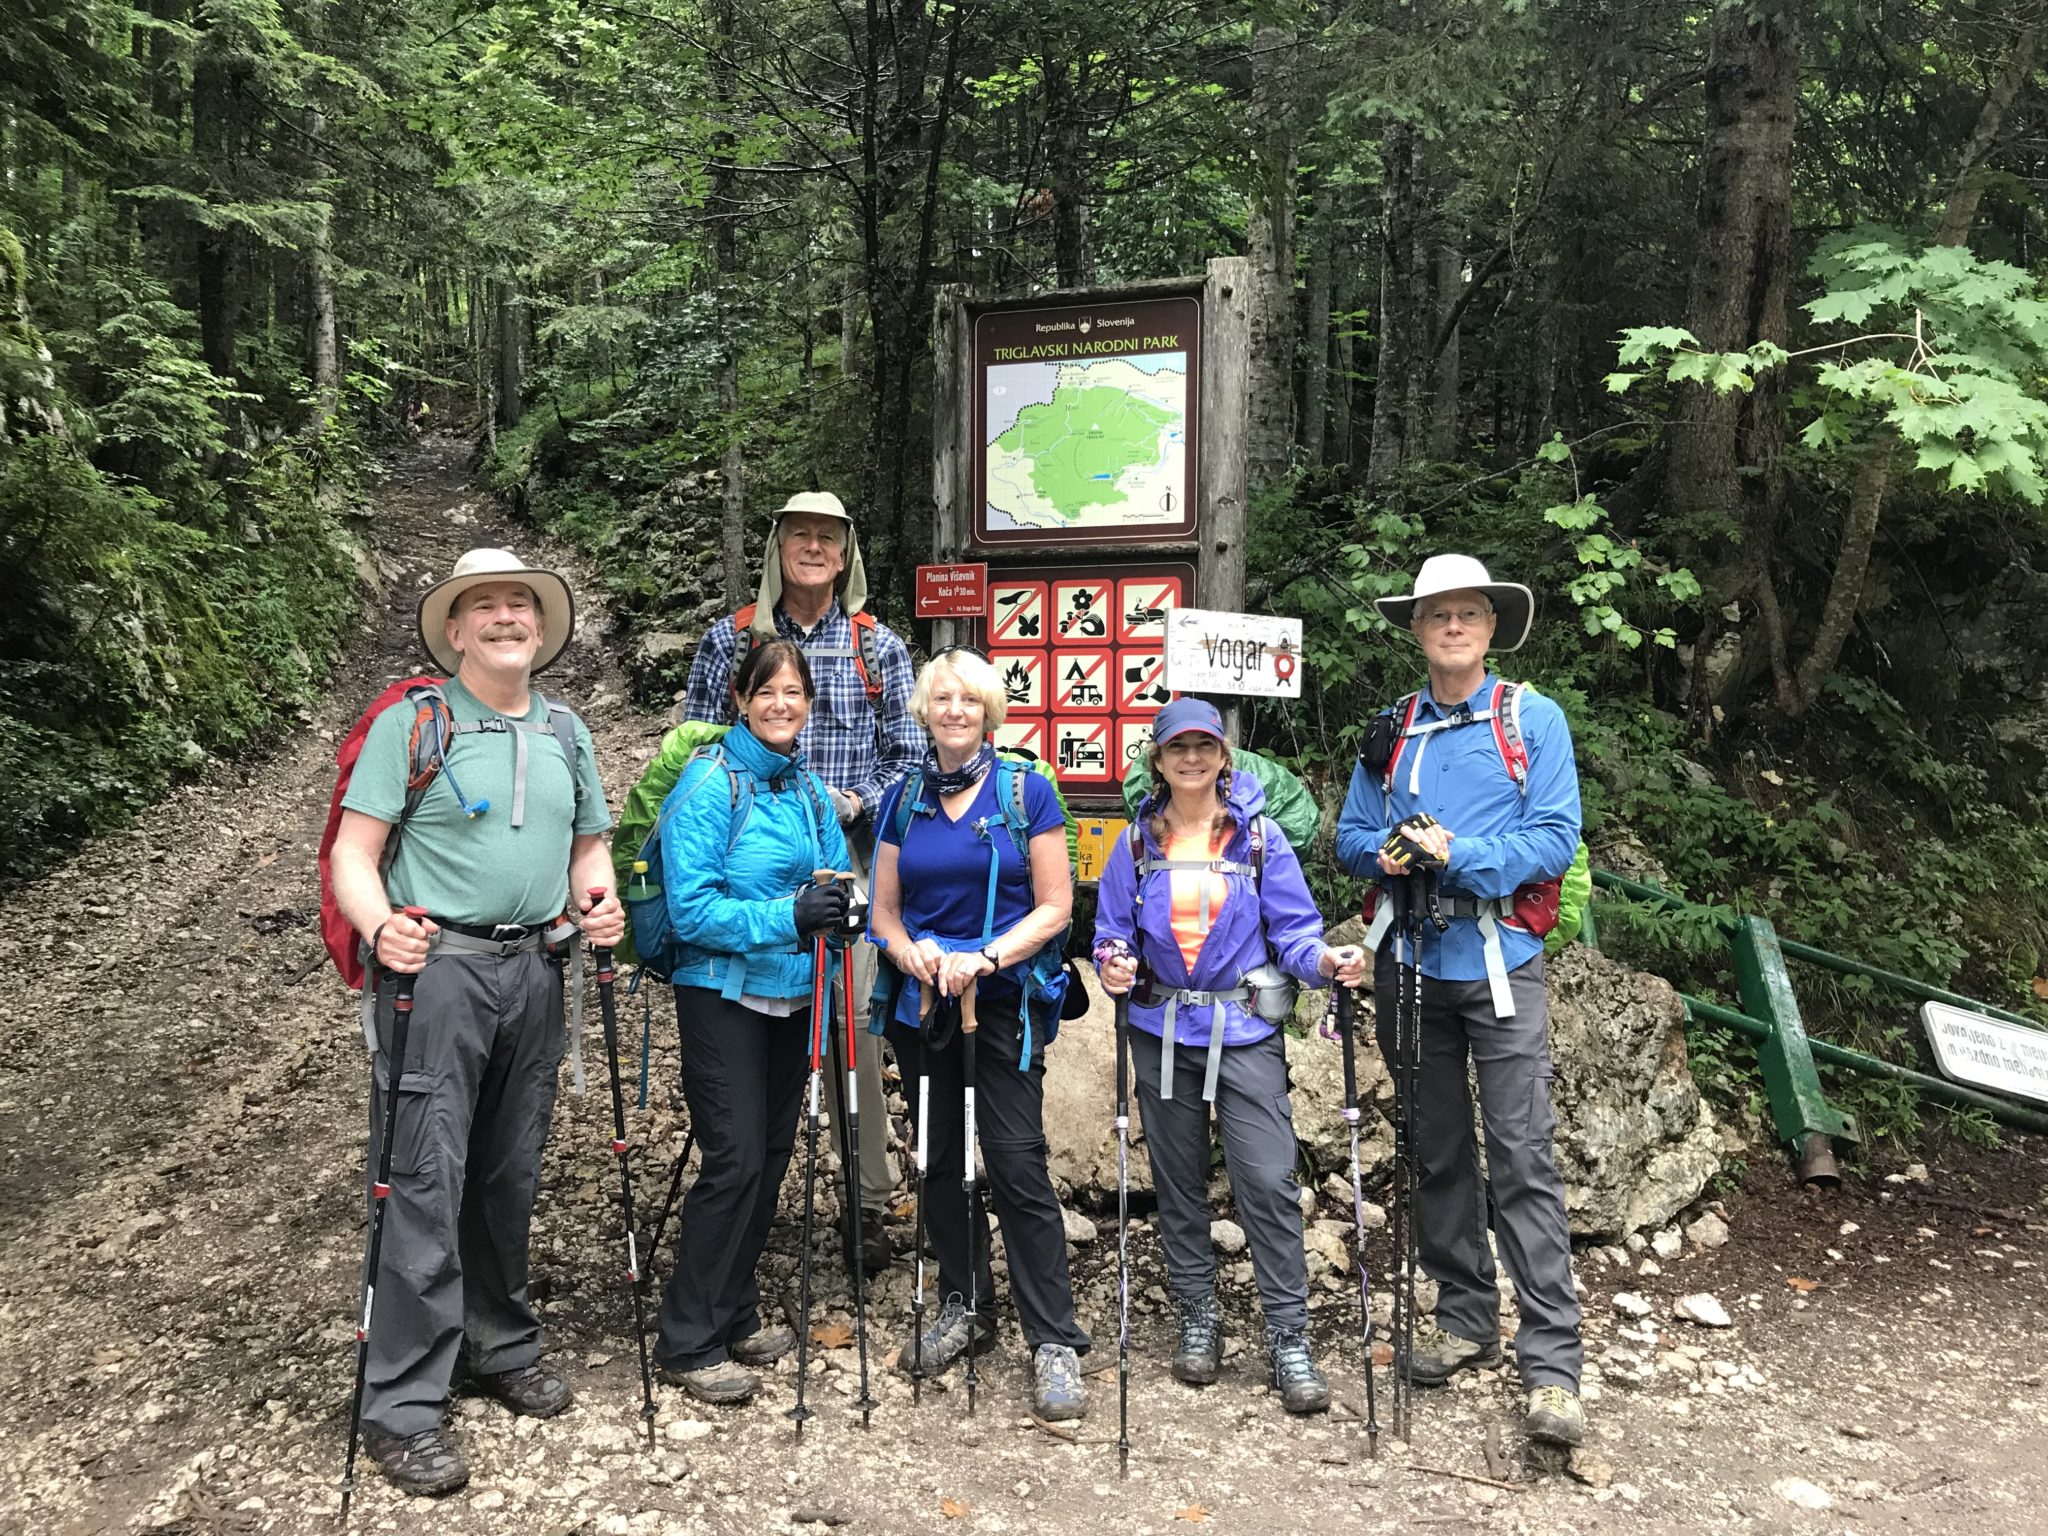 Our Julian Alps hiking group